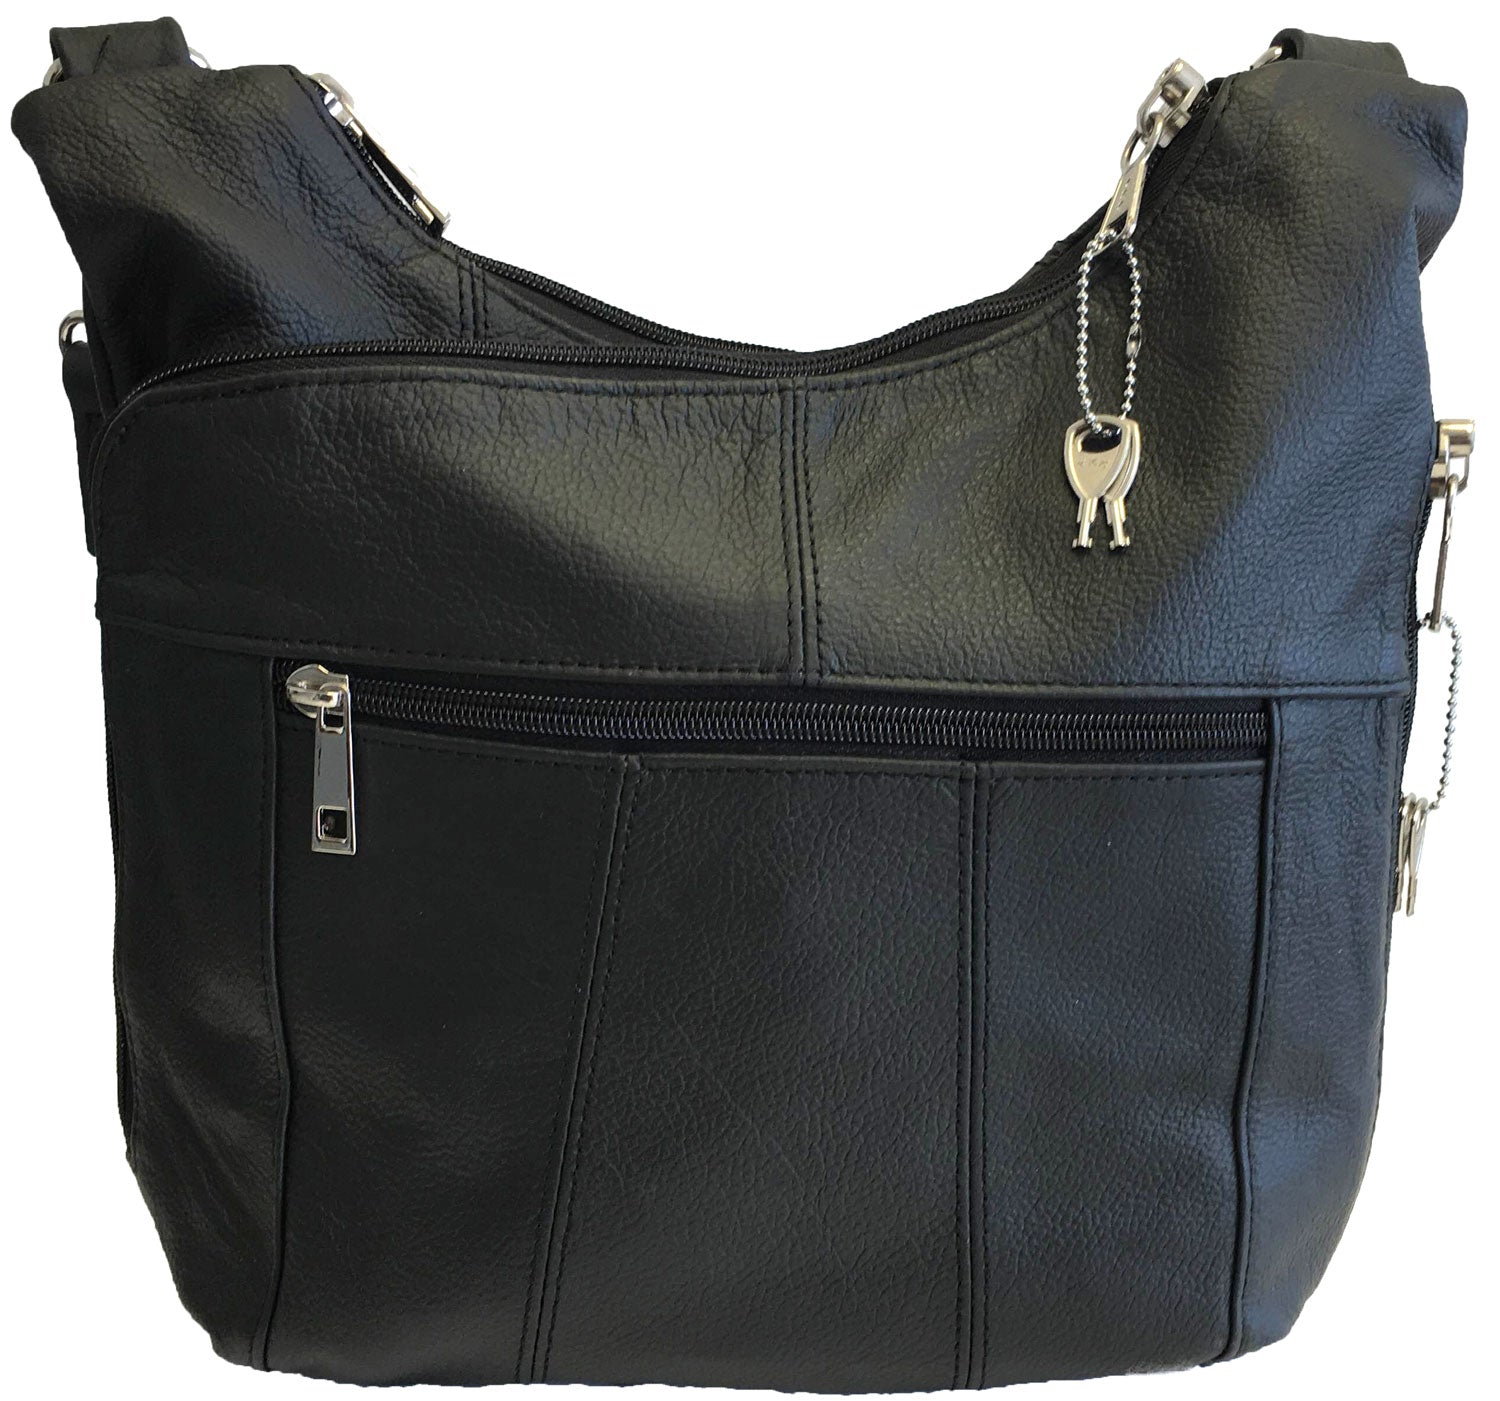 Crossbody Purse For Concealed Carry Walden Wong